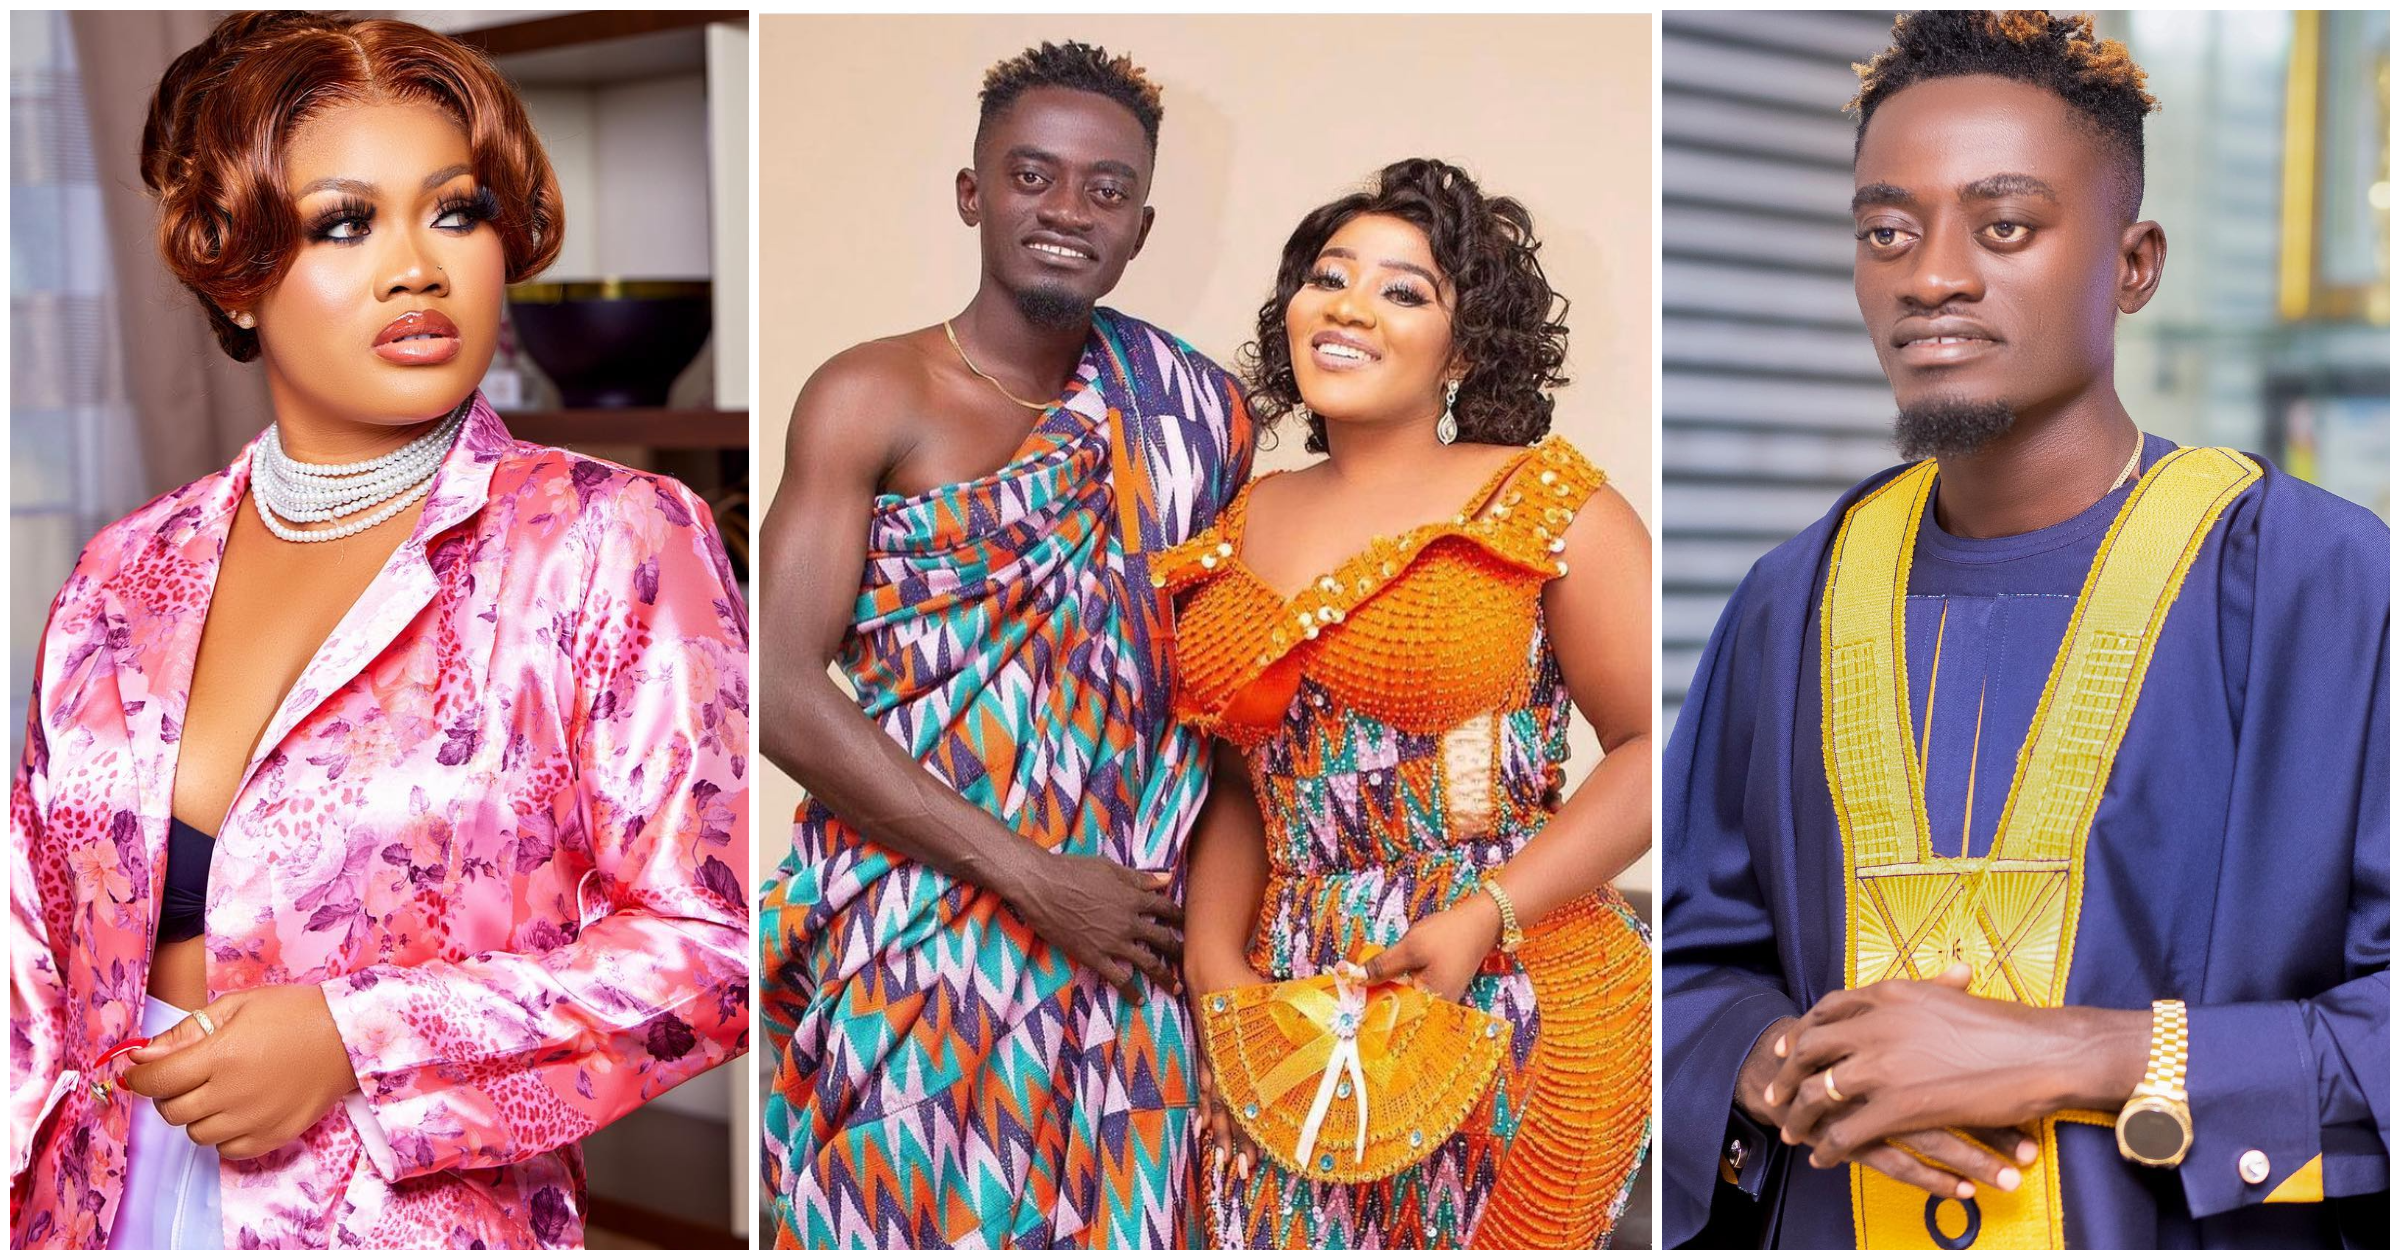 Sandra Sarfo Ababio finally speaks on Lil Win's wedding and shares loved-up photo, fans can't think far